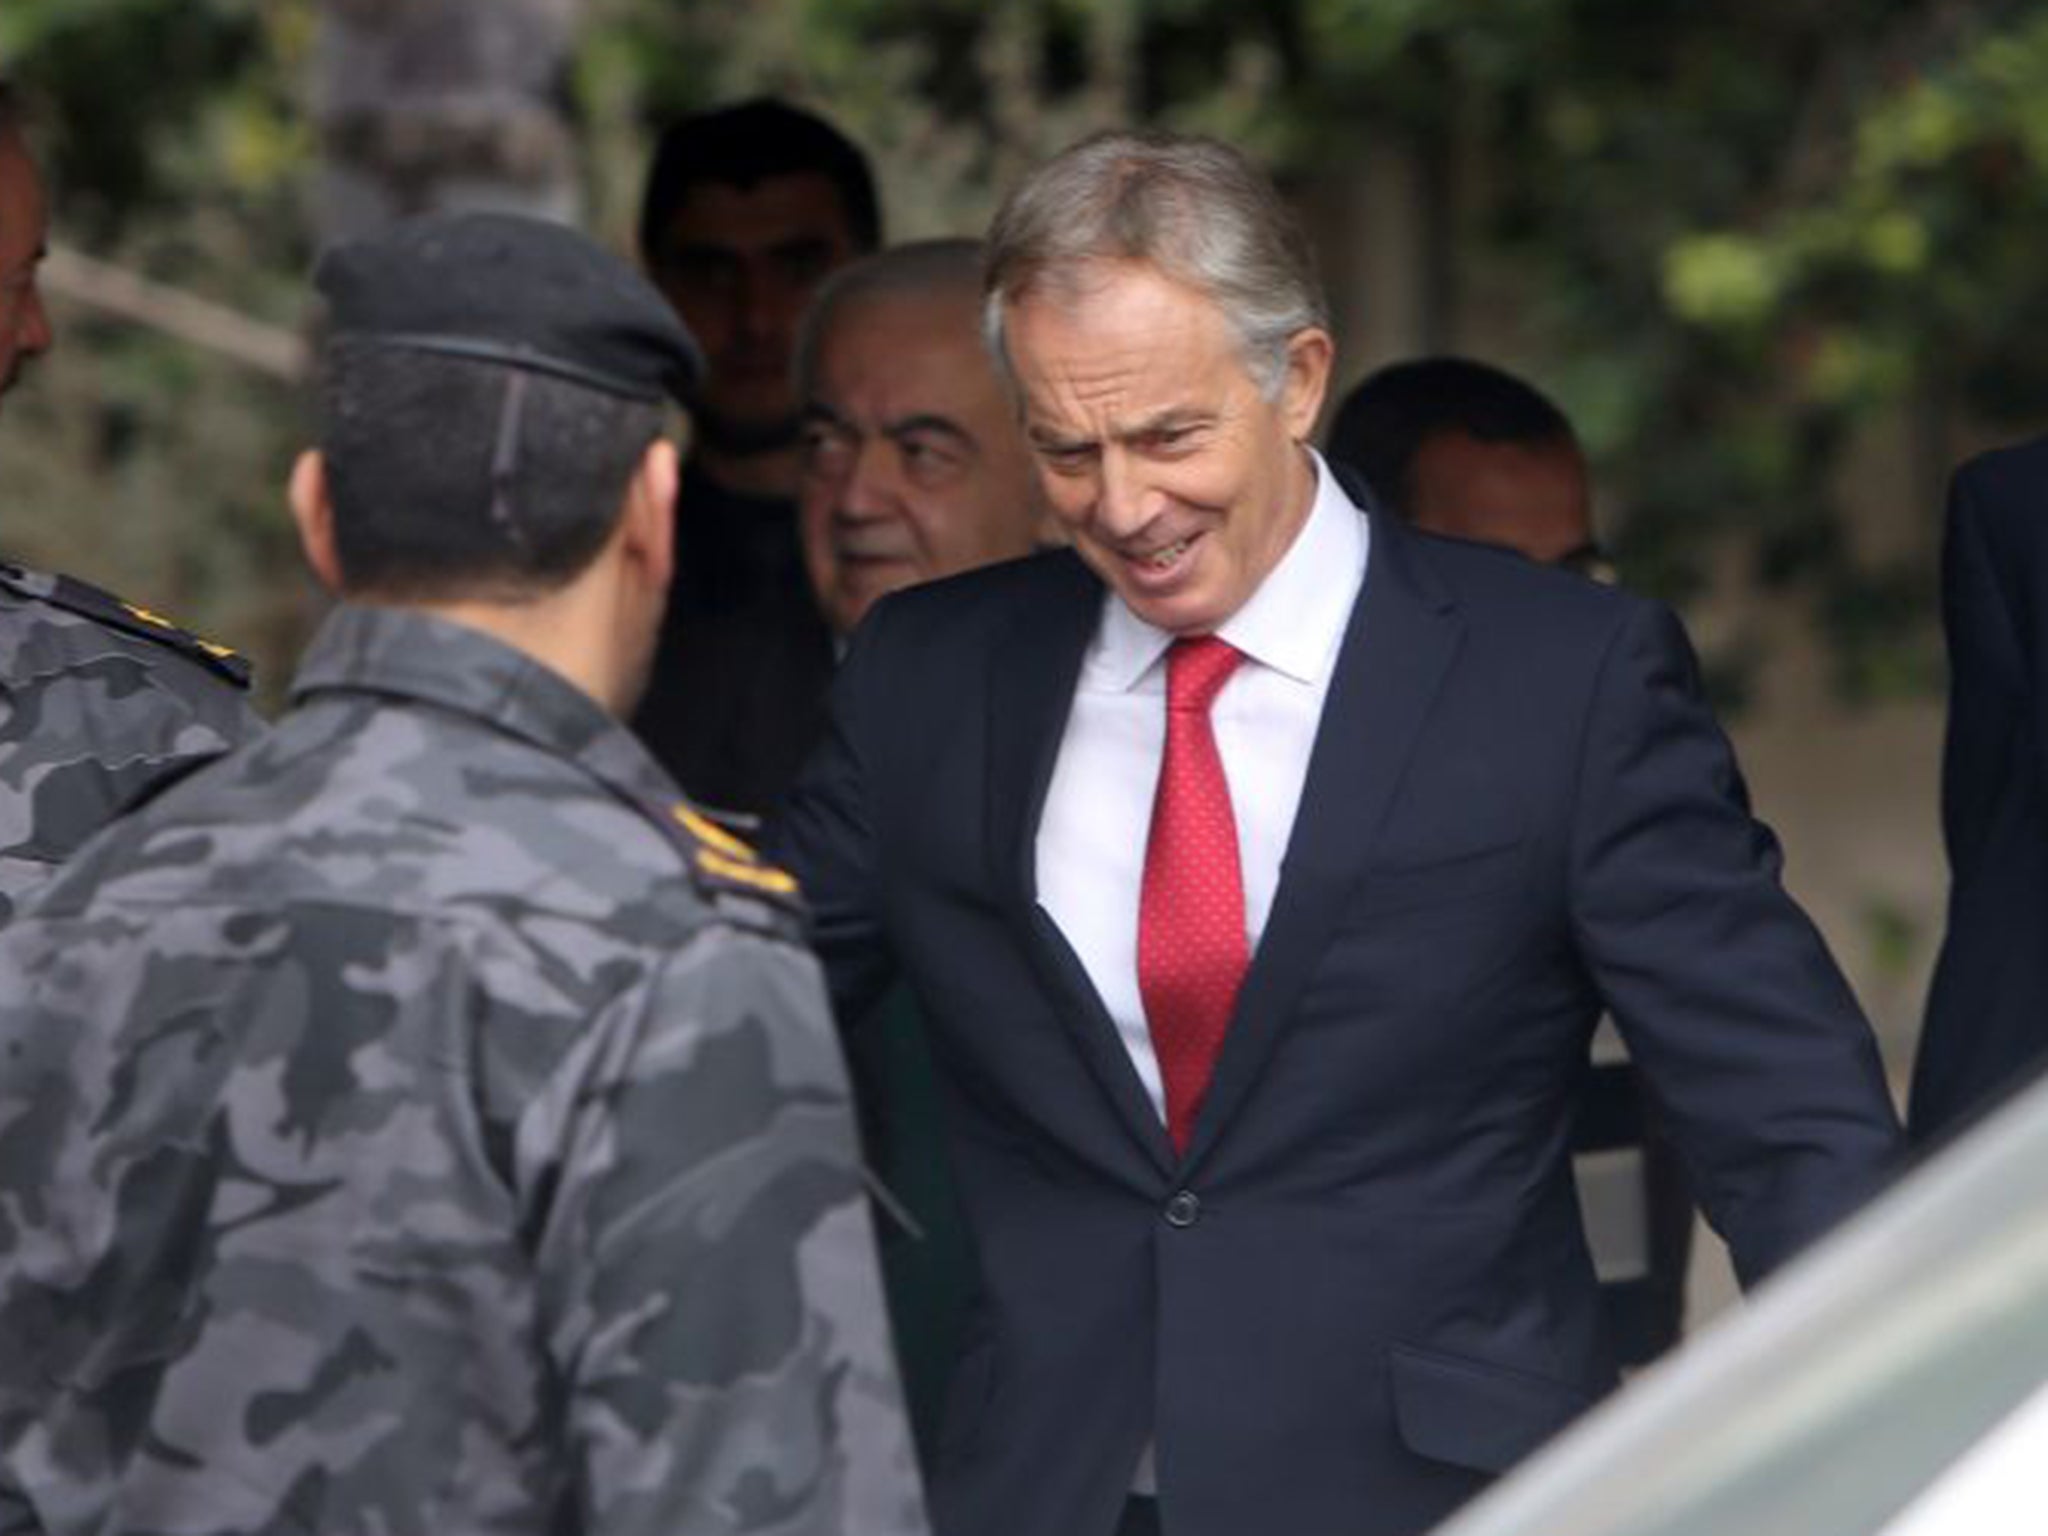 Former Middle East Quartet envoy Tony Blair leaving after a meeting with Palestinian unity government ministers in Gaza city in February